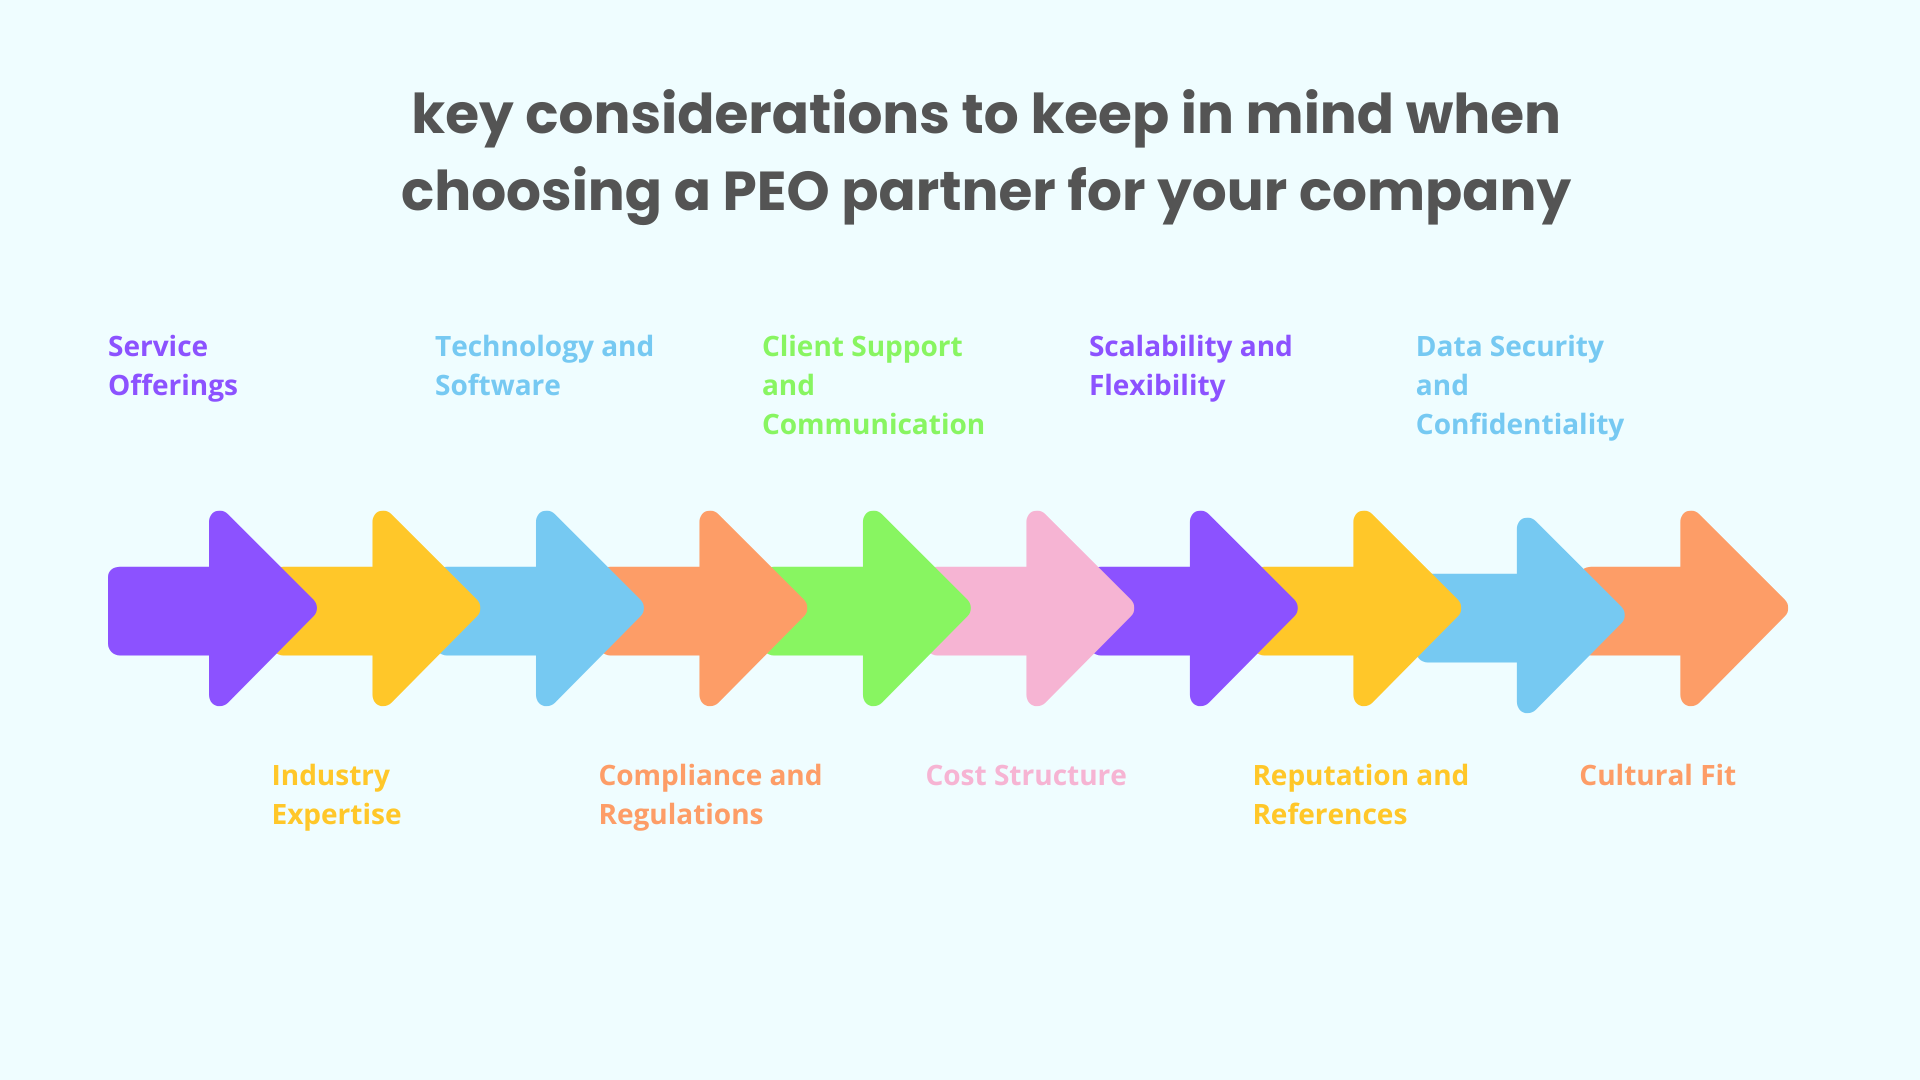 key considerations to keep in mind when choosing a PEO partner for your company